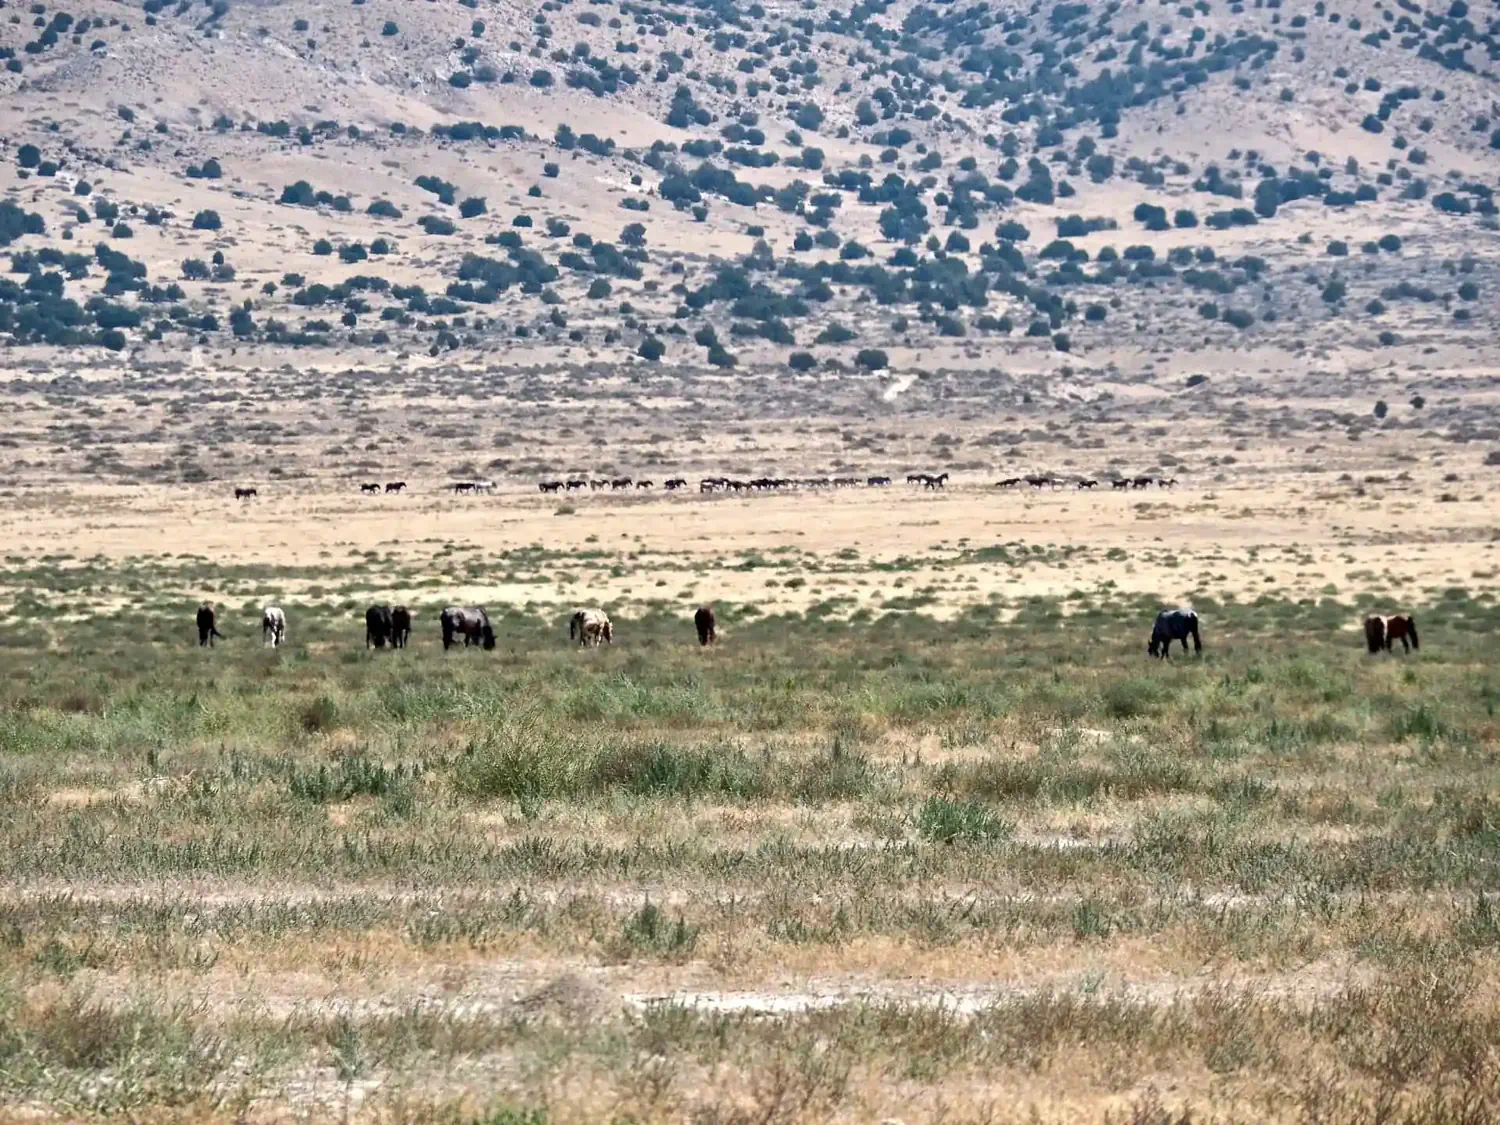 Zooming in on the group of wild horses